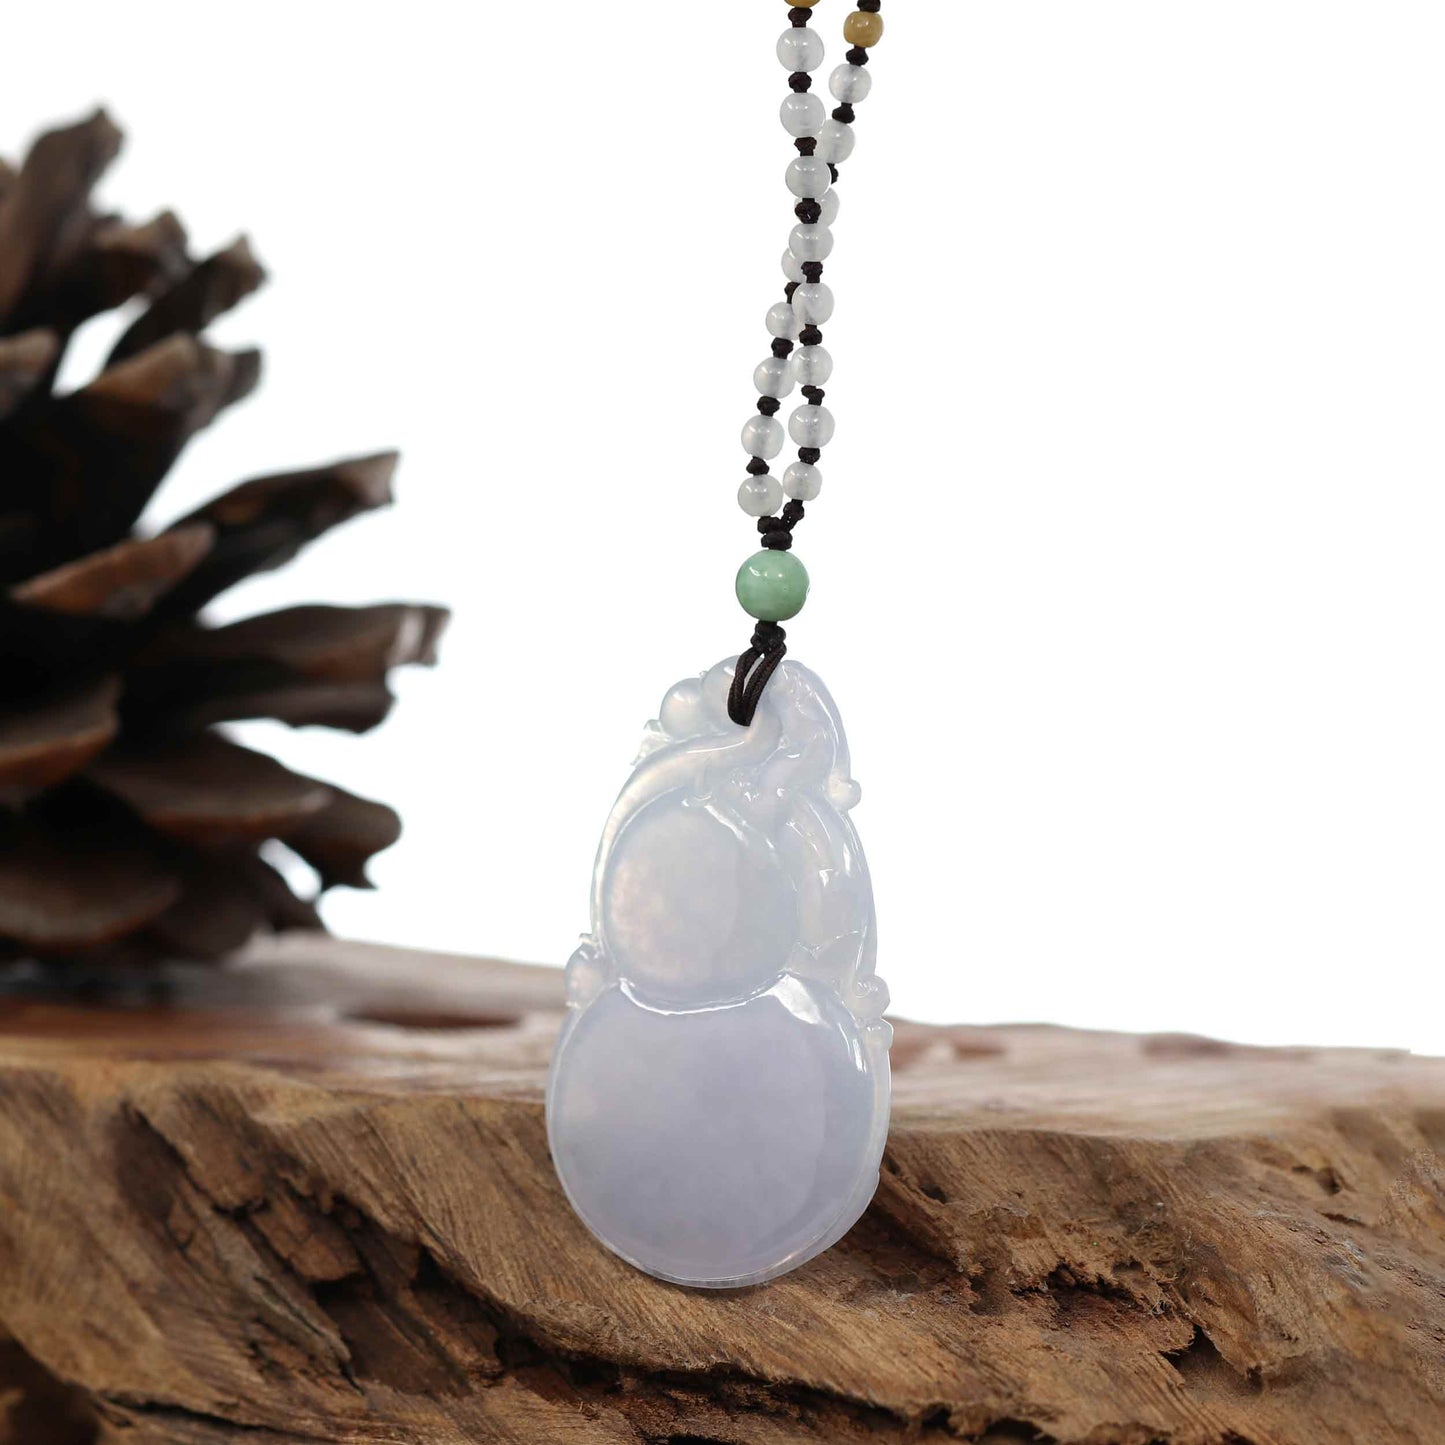 Genuine Ice Light Lavender Jadeite Jade "Good Luck HuLu with Dragon Accent" Pendant Necklace With Real Jadeite Beads Necklace